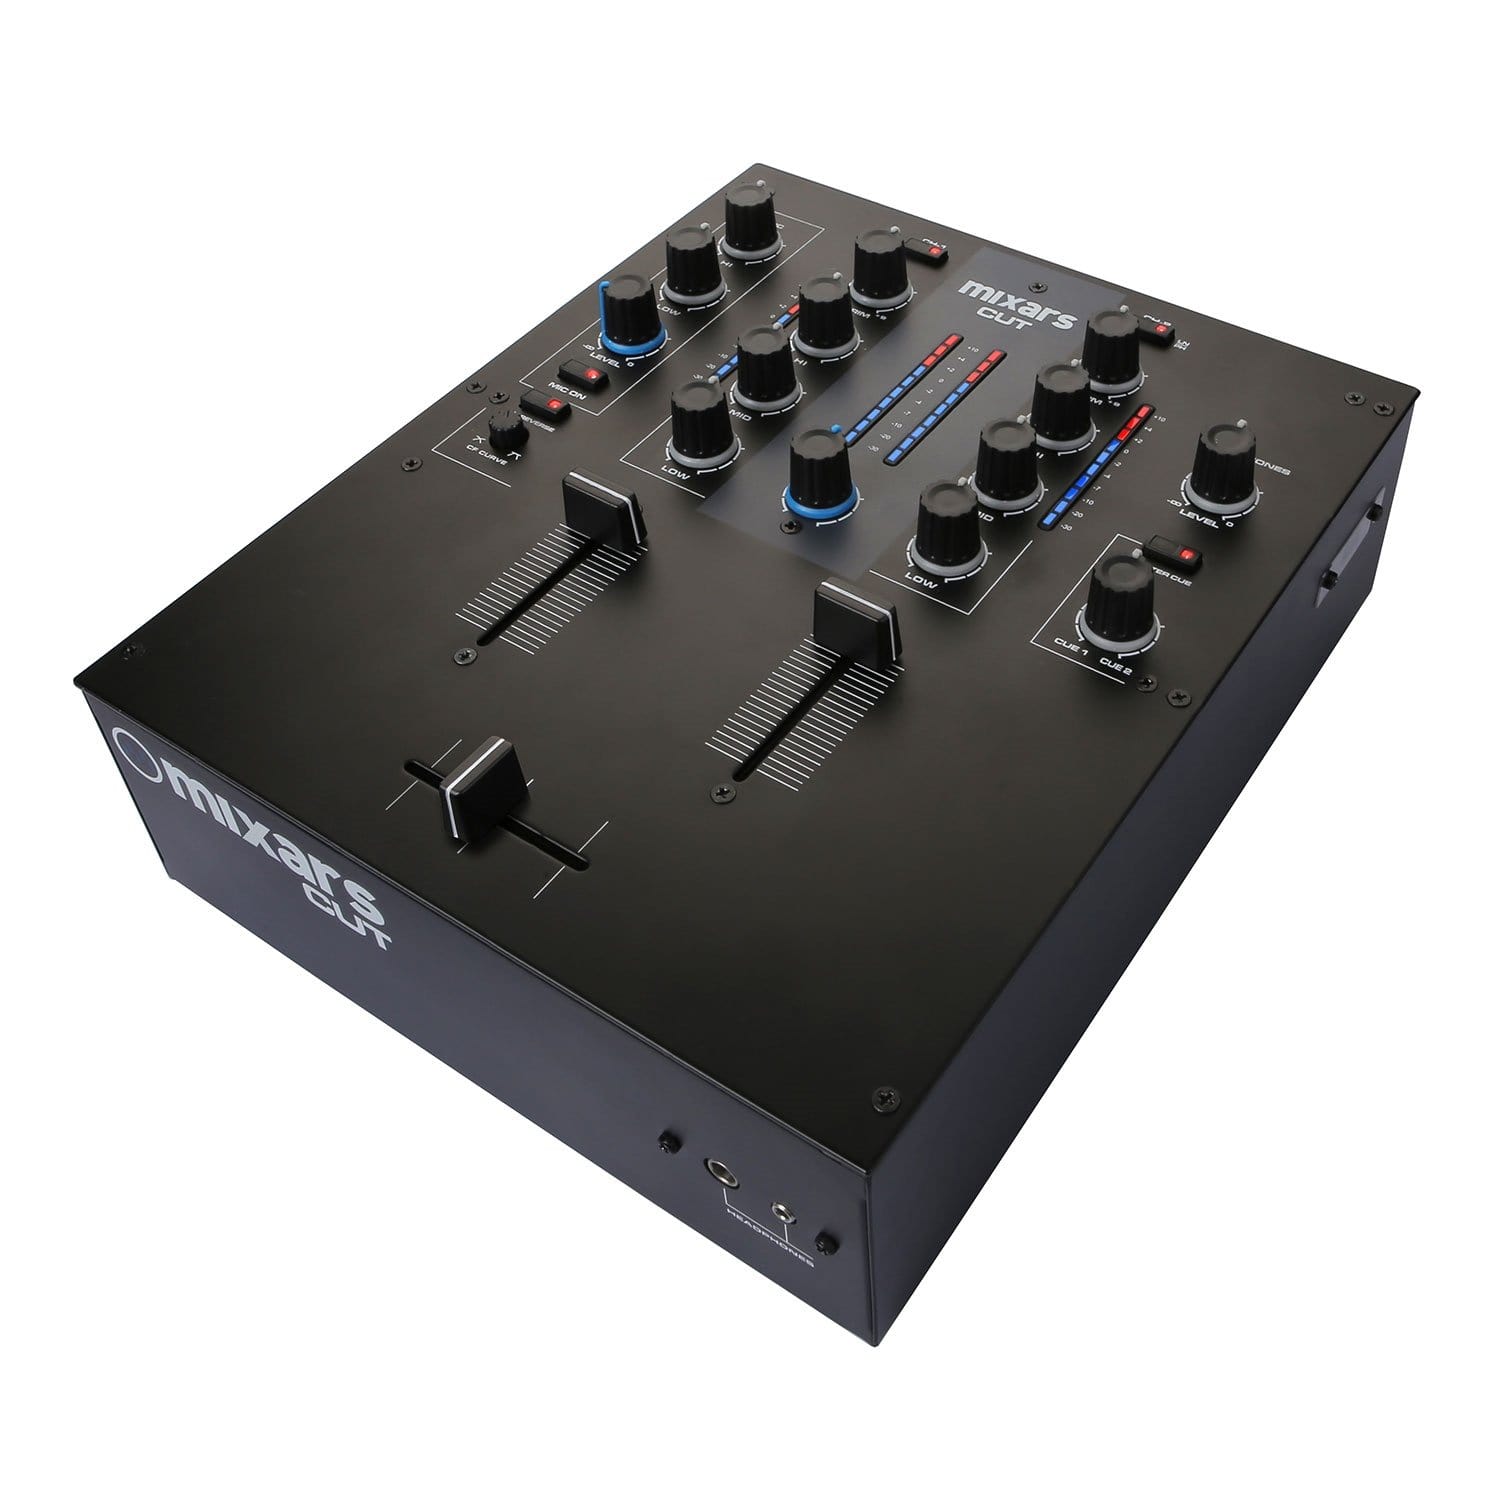 Mixars CUT MKII 2-Channel Mixer with Galileo Crossfader - PSSL ProSound and Stage Lighting